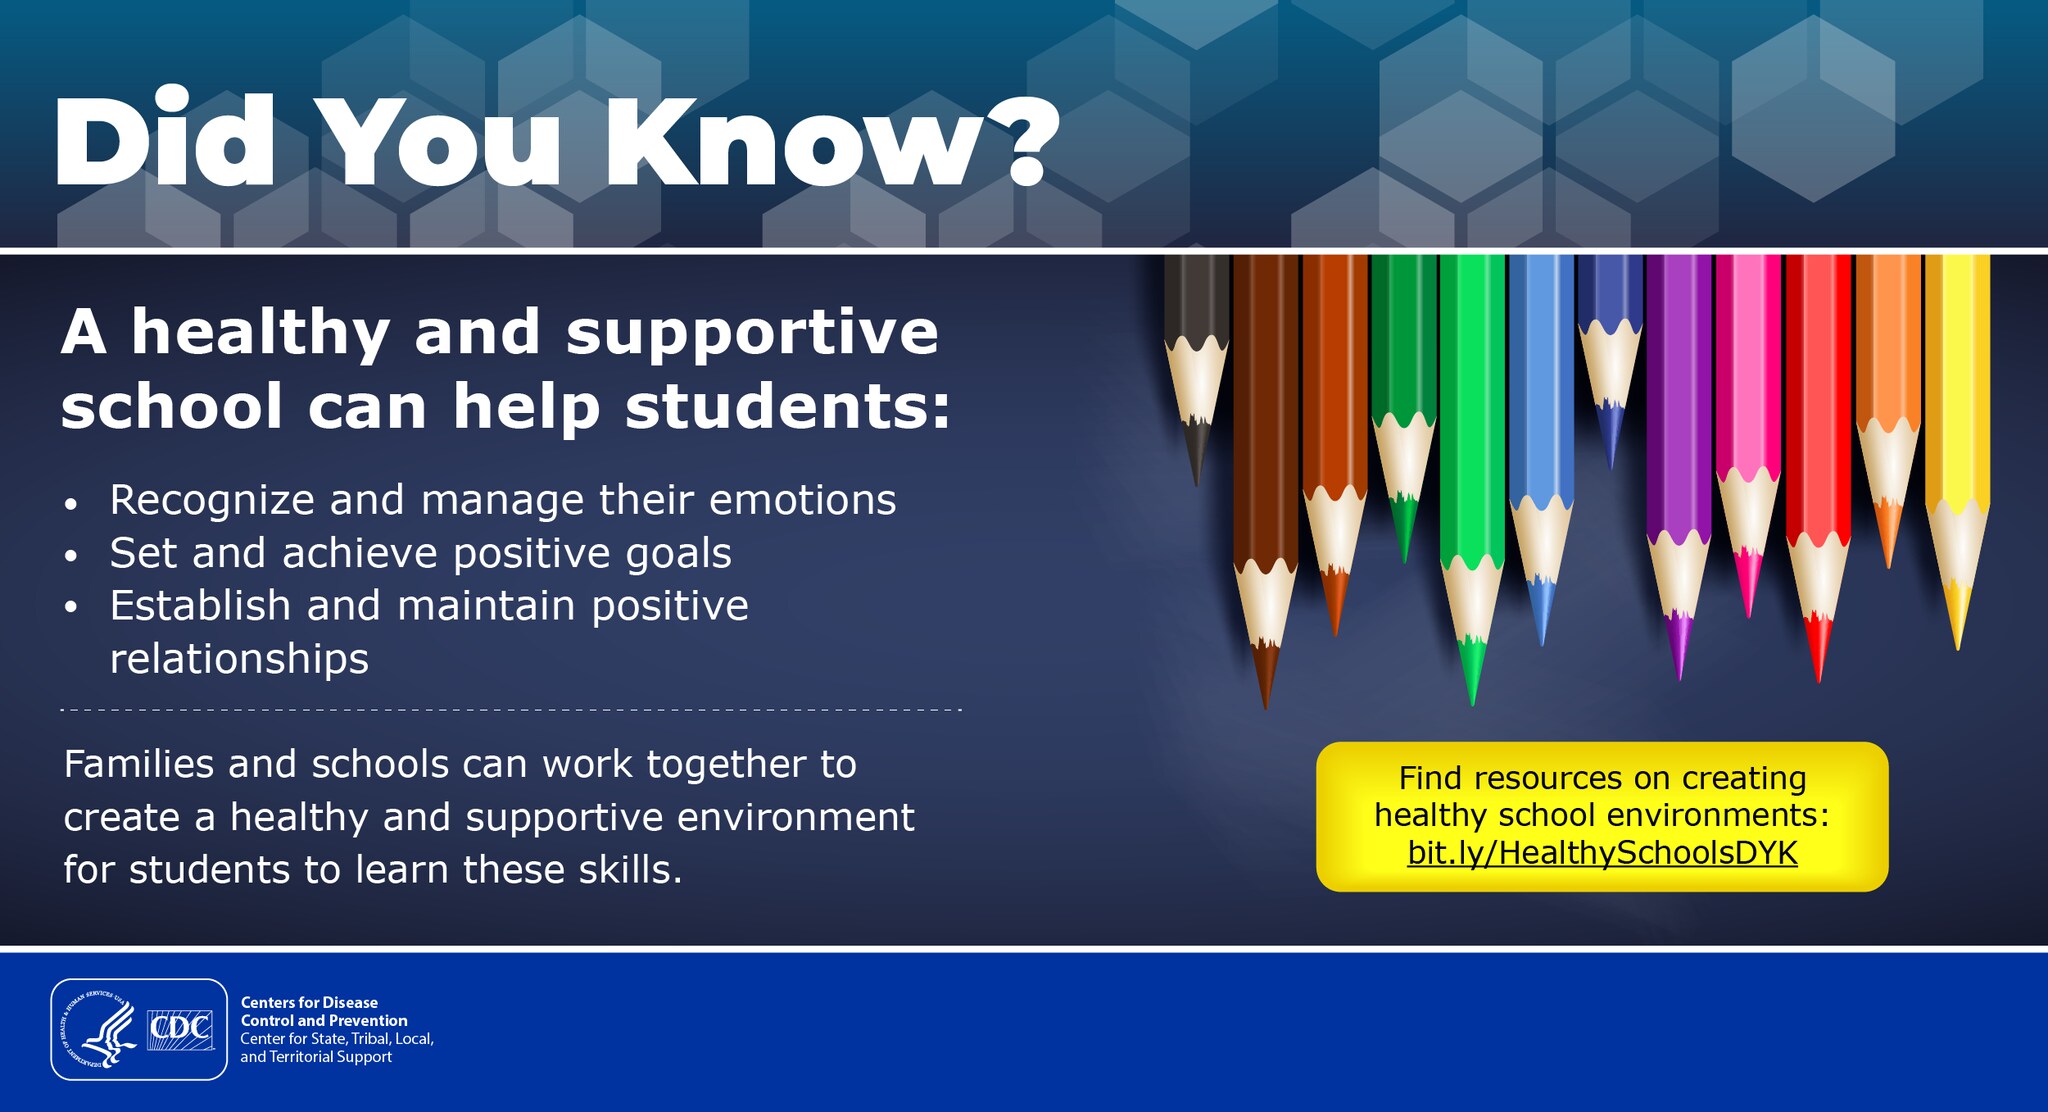 An infographic titled Did You Know? with an illustration of multicolored pencils. Text says “A healthy and supportive school can help students: recognize and manage their emotions; set and achieve positive goals; and establish and maintain positive relationships. Families and schools can work together to create a healthy and supportive environment for students to learn these skills. Find resources on creating healthy school environments: bit.ly/HealthySchoolsDYK”